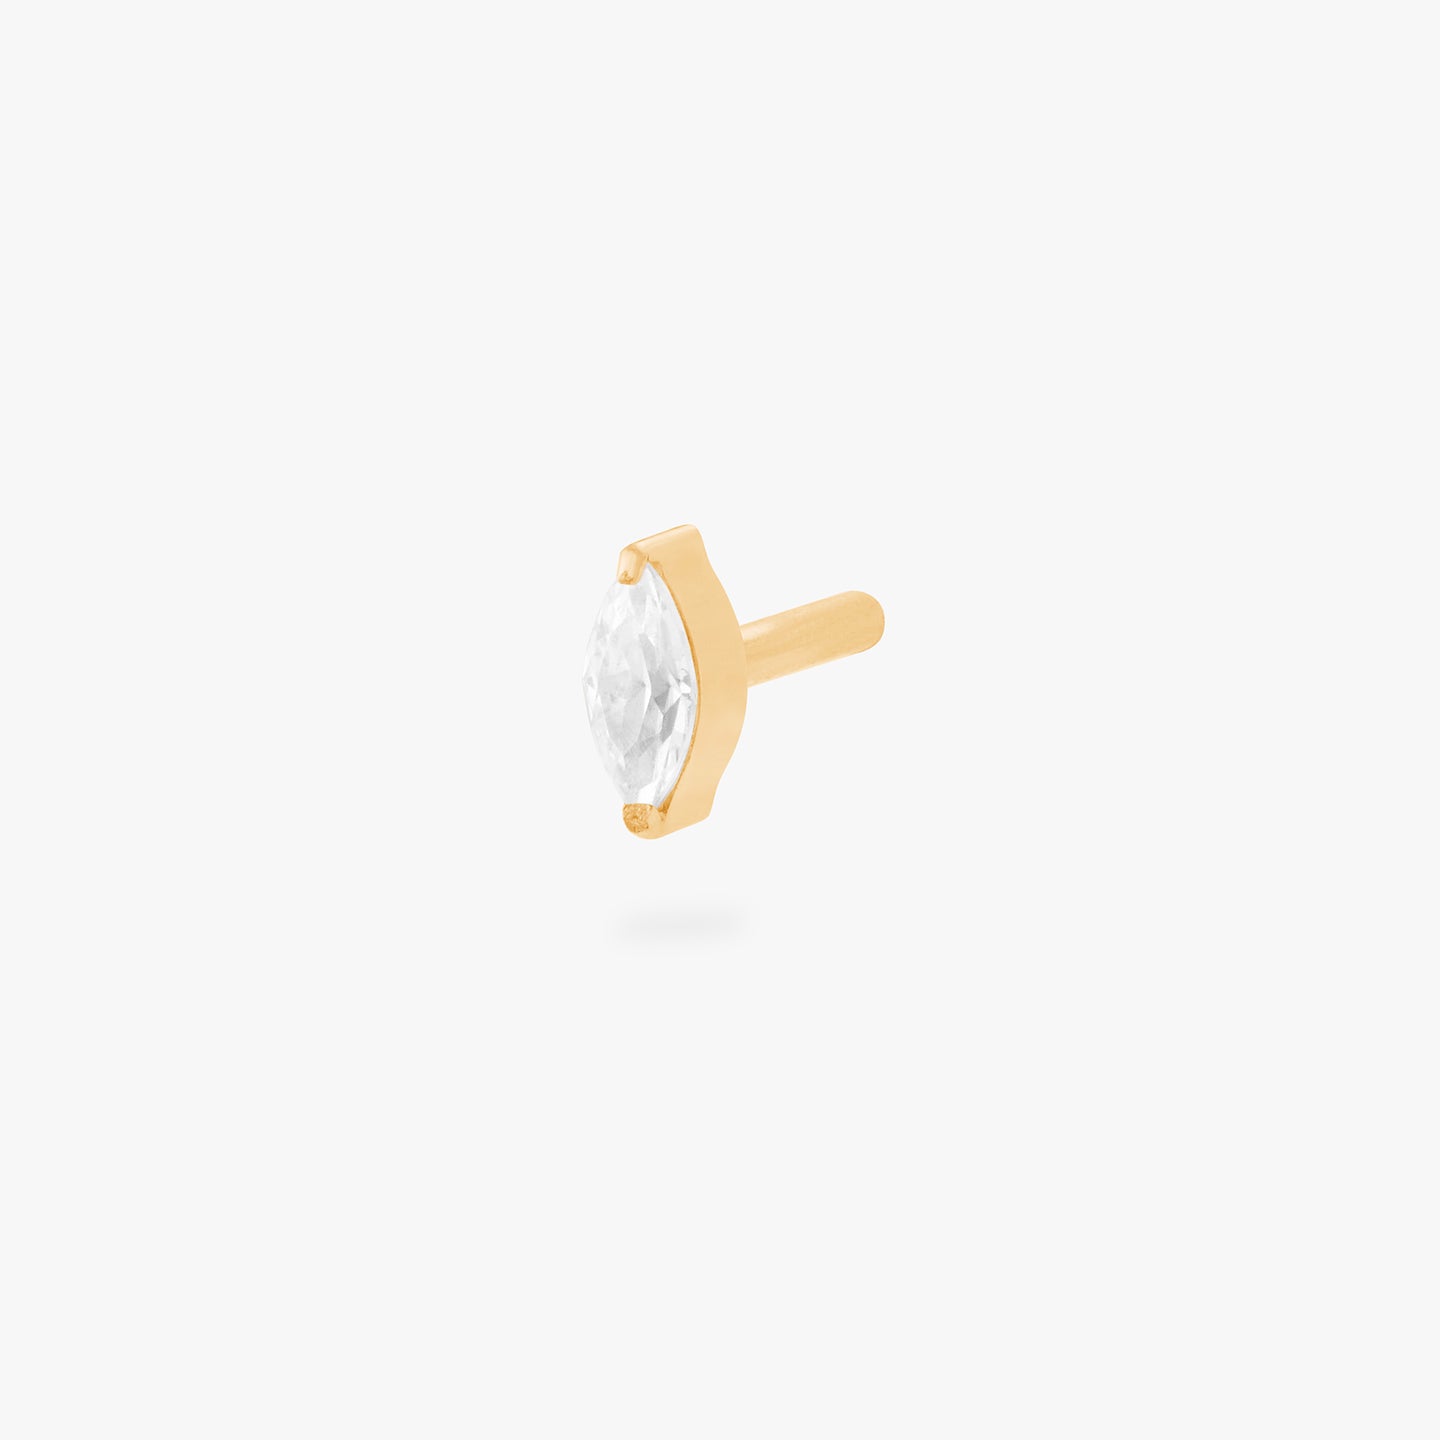 This is an image of a 6mm length gold/clear flatback post with a marquise shaped CZ disc. [hover] color:null|6mm